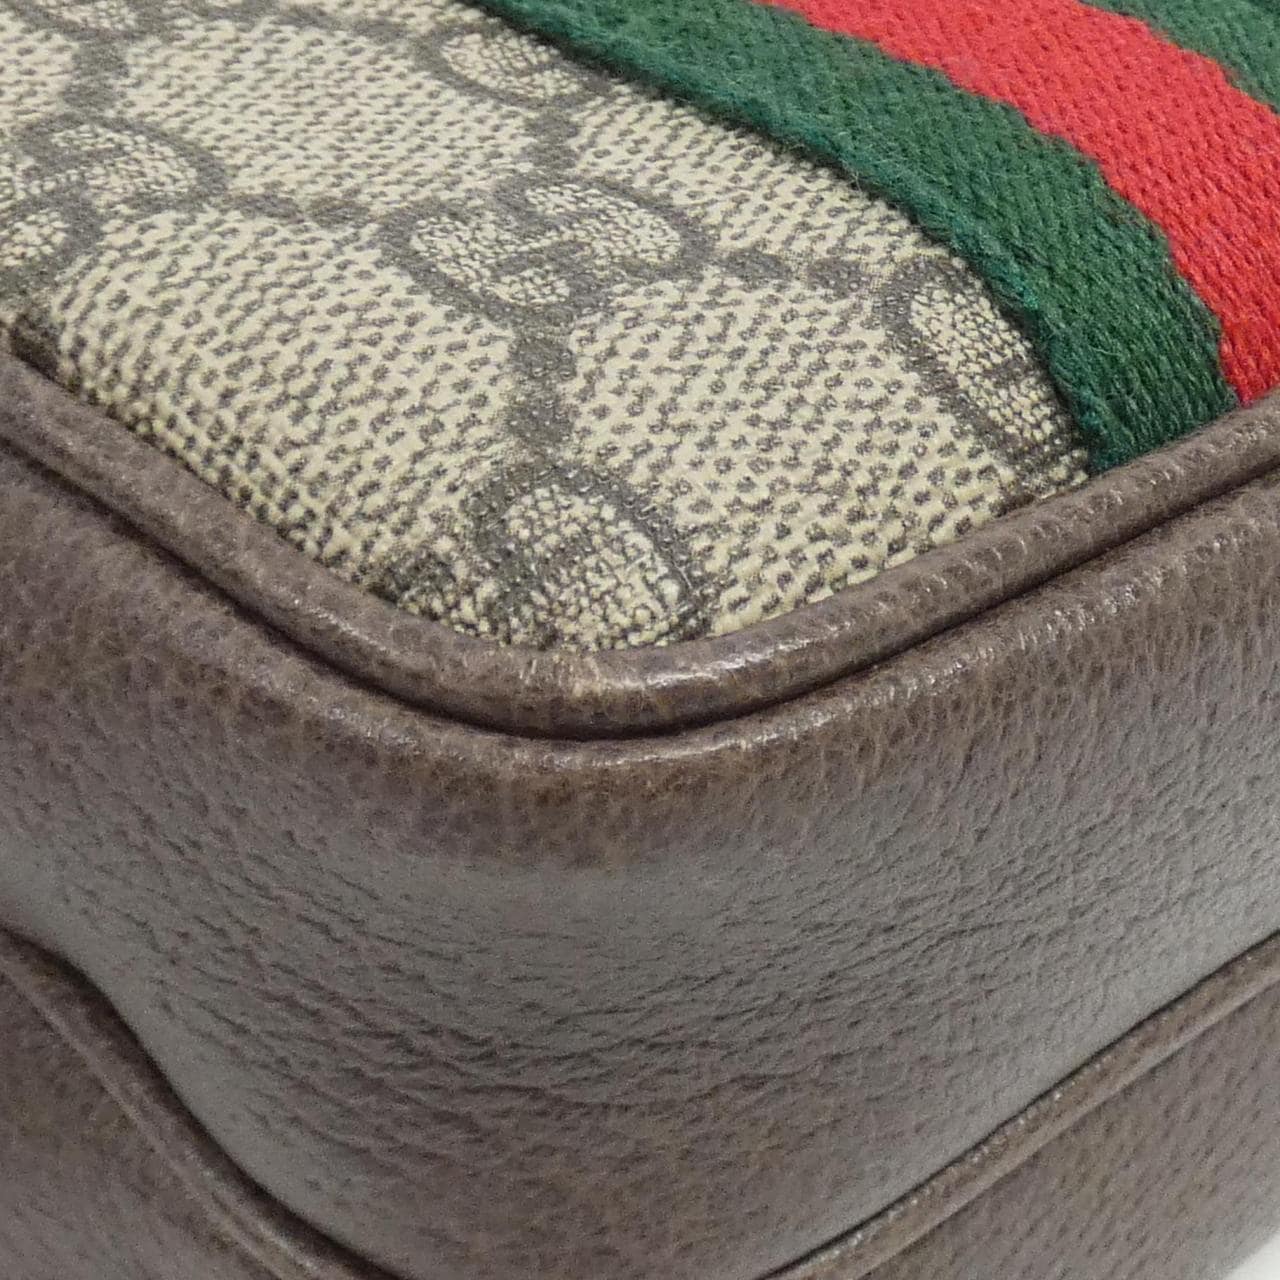 Gucci OPHIDIA 546595 96IWS肩背包